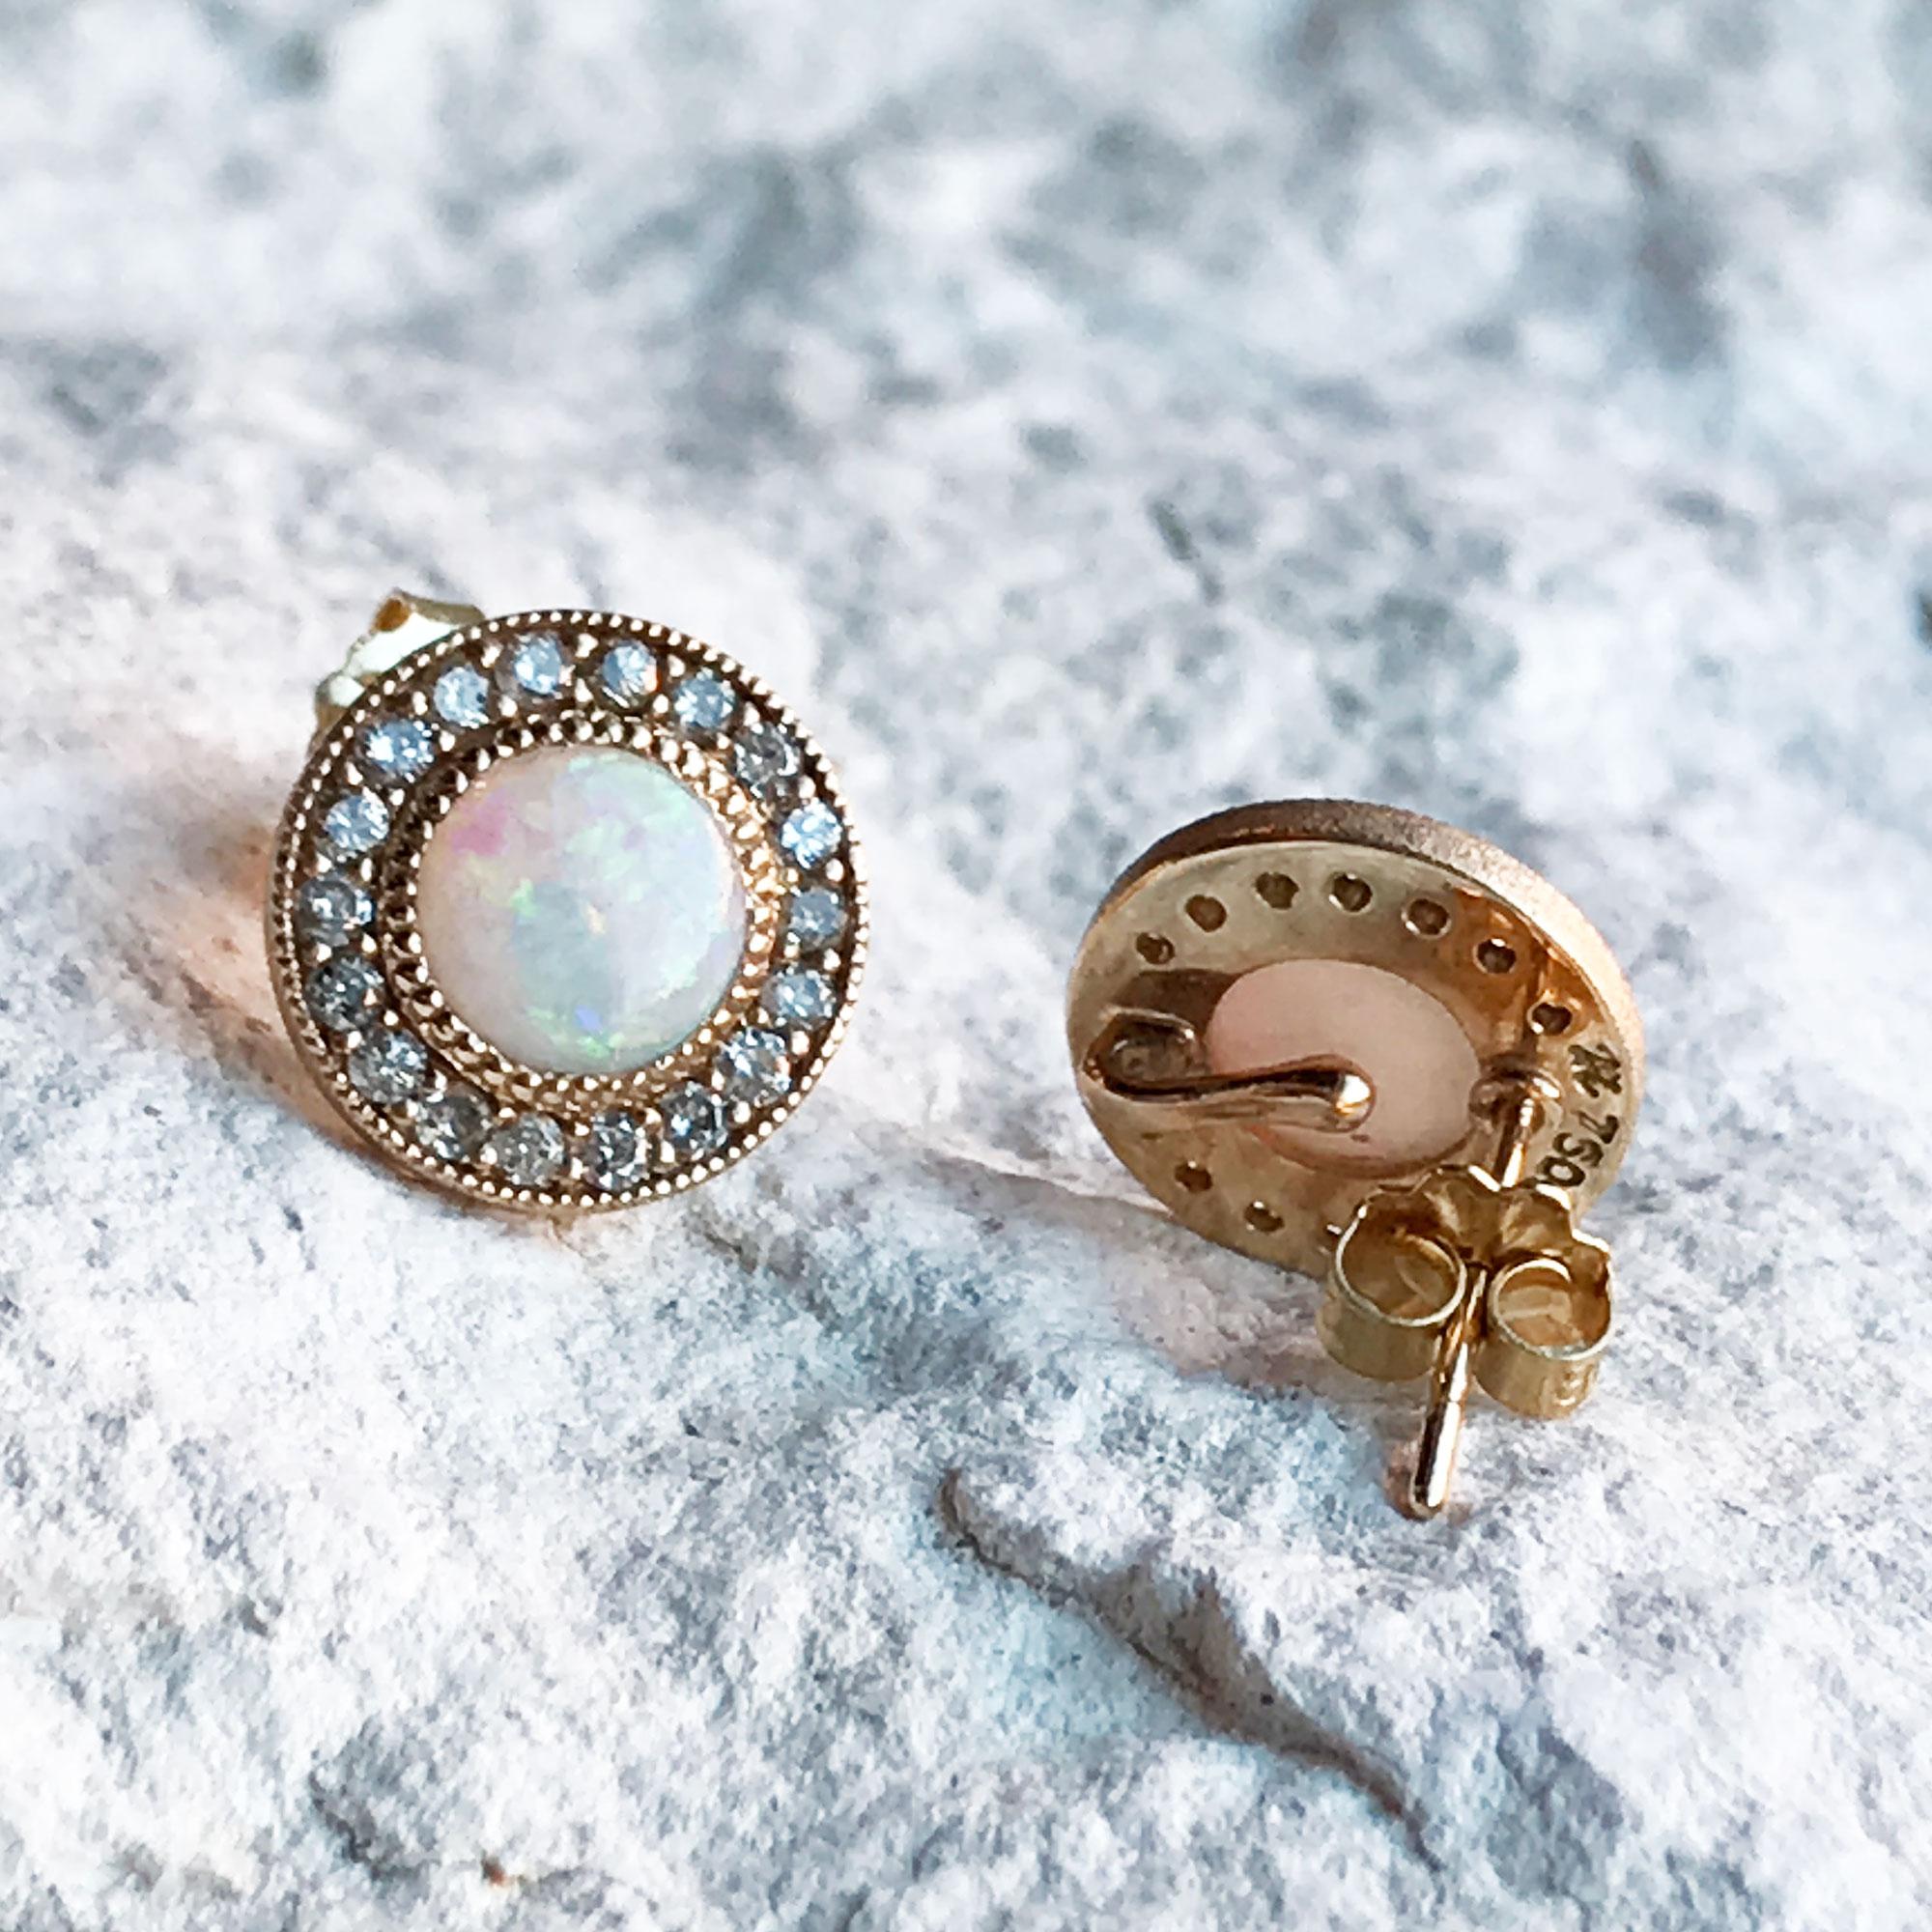 Designed with concentric circles of engraved gold and pavé diamonds surrounding white opal cabochons, the Diamond Orbit Gold Studs elevate everyday looks with a cool mix of textures and lusters.

Nina Nguyen Design's patent-pending earrings have an